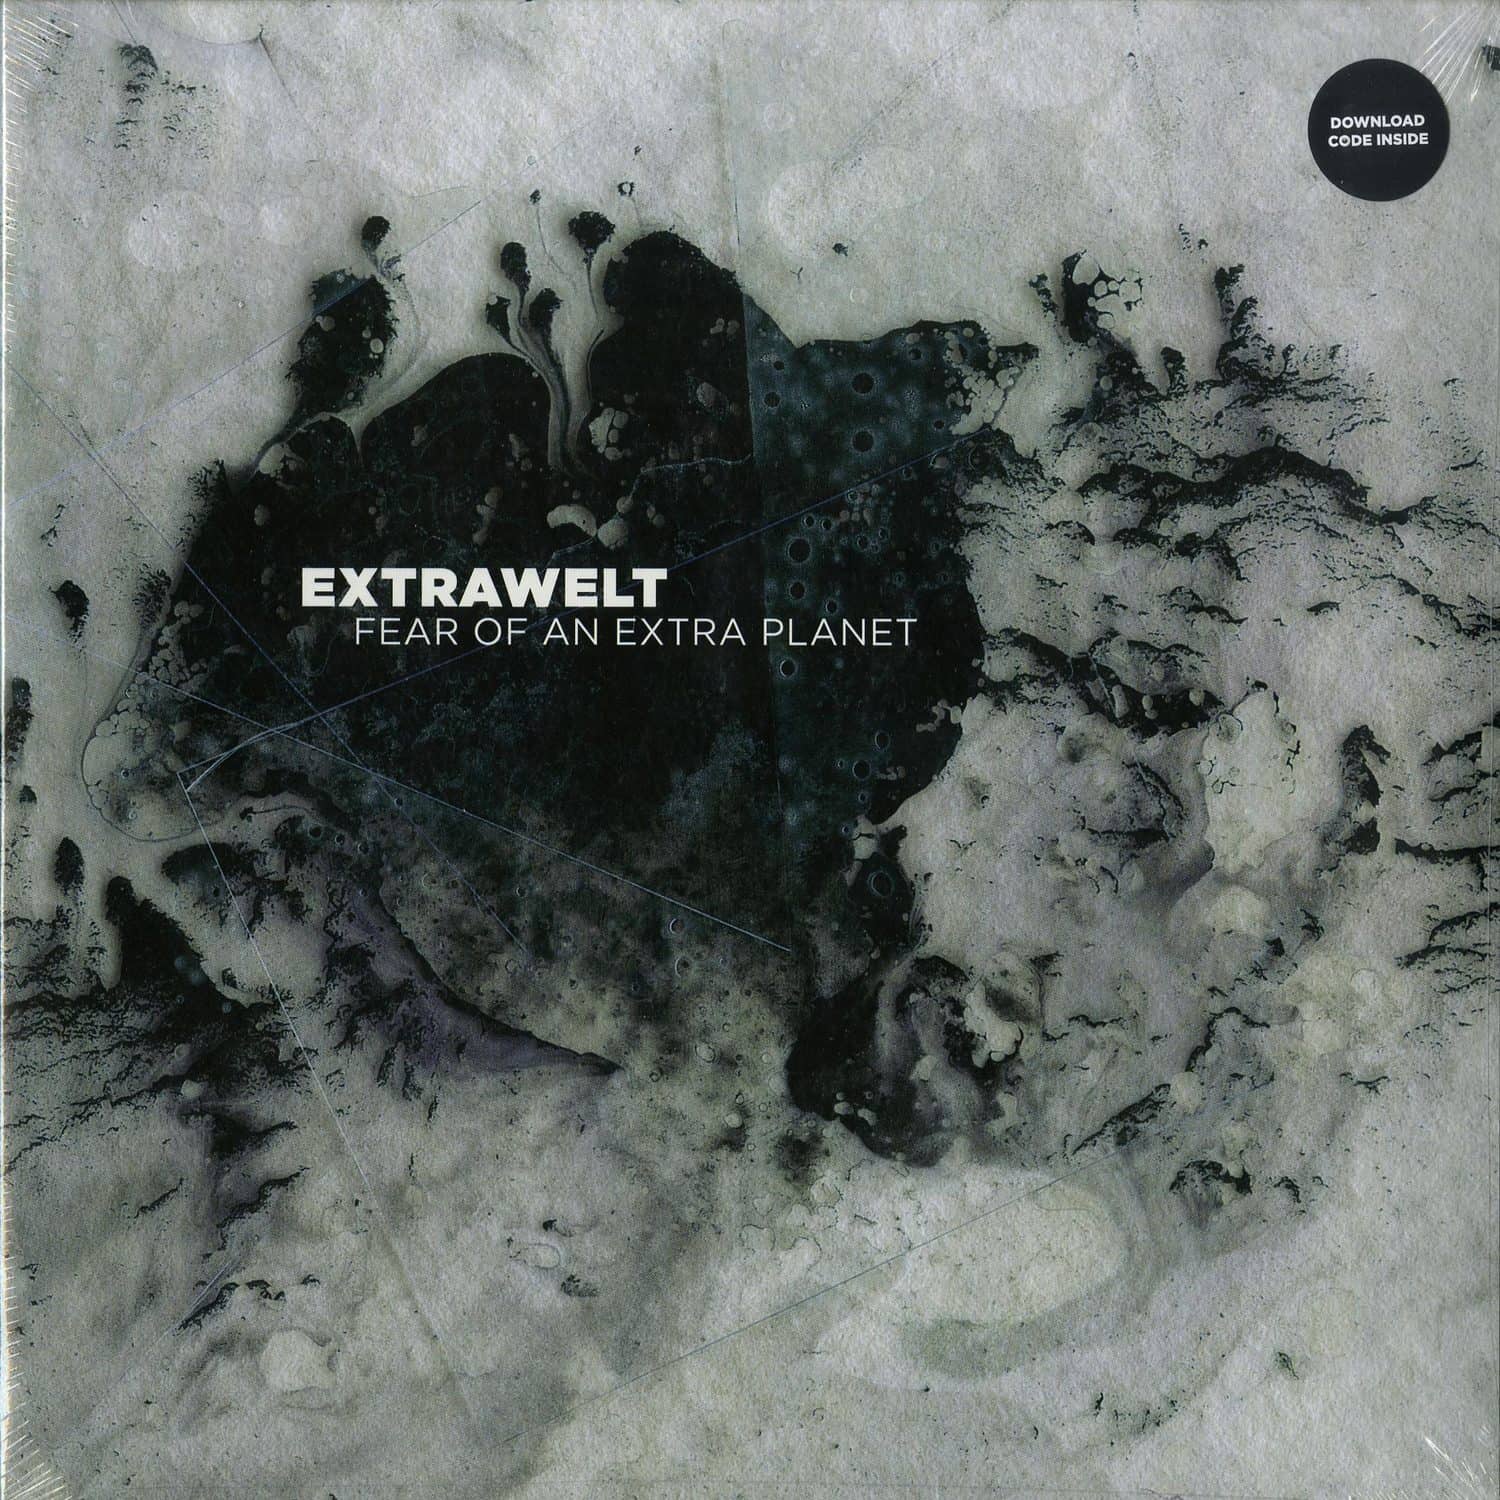 Extrawelt - FEAR OF AN EXTRA PLANET 